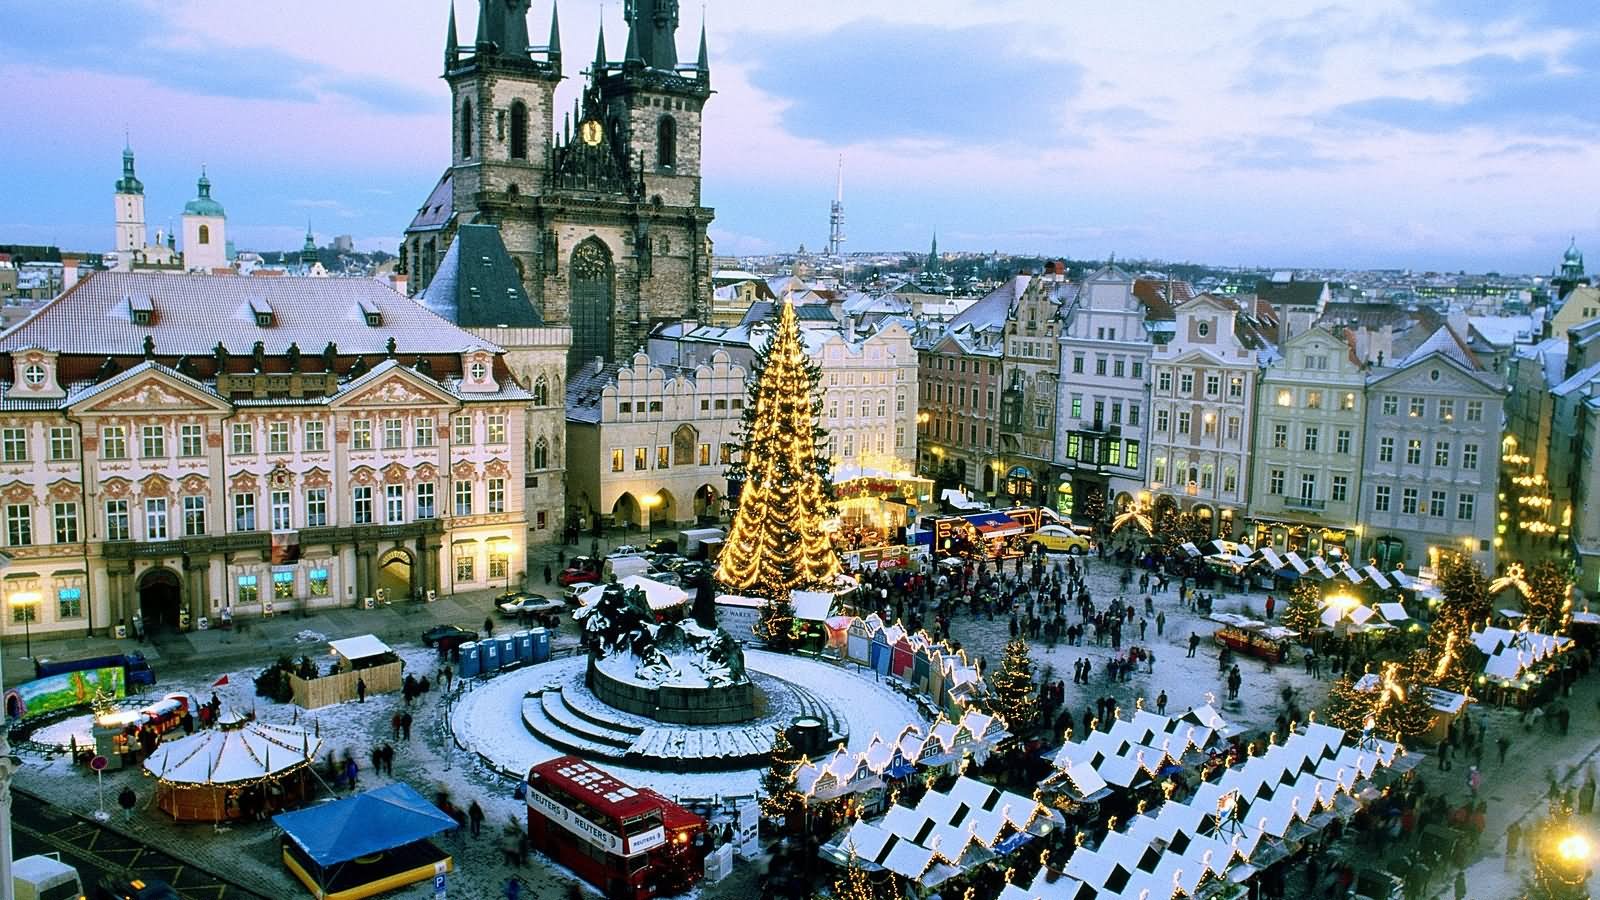 Beautiful Christmas Market At Old Town Square, Prague